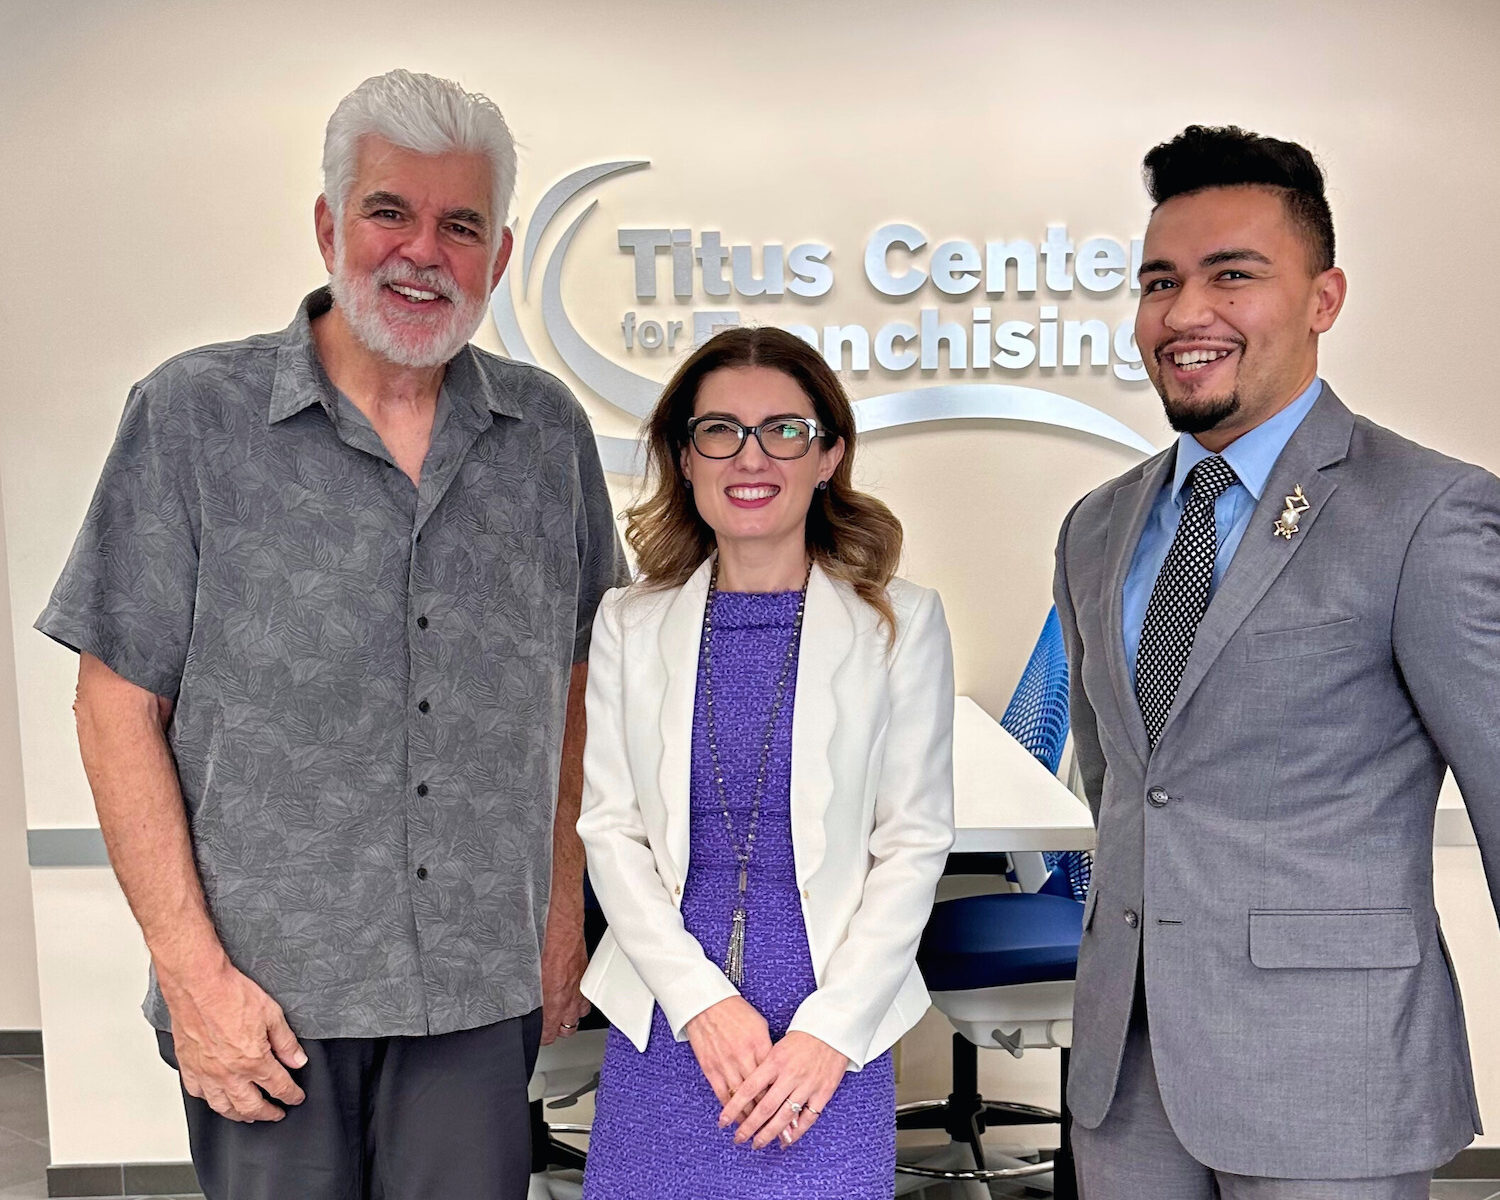 Bright Pink Agency's Madalina Iordache and Matt Cancino meeting with Dr. John Hayes, Director of the Titus Center for Franchising at Palm Beach Atlantic University.